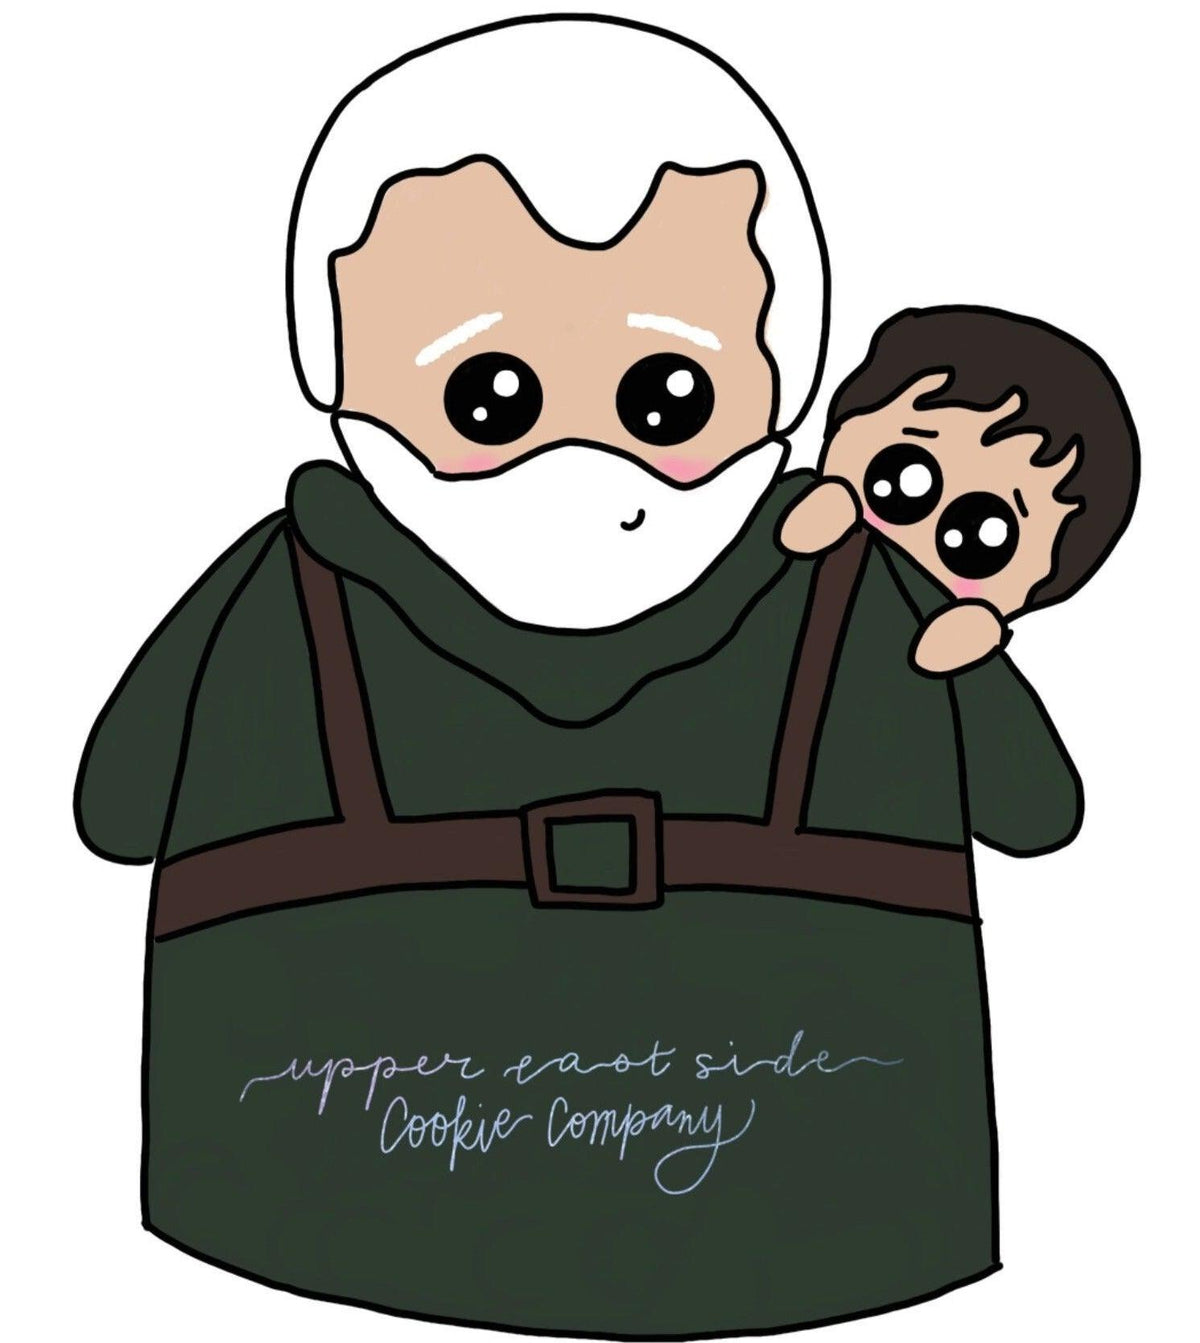 Hodor and Bran Cookie Cutter by Upper East Side Cookie Company - Sweetleigh 